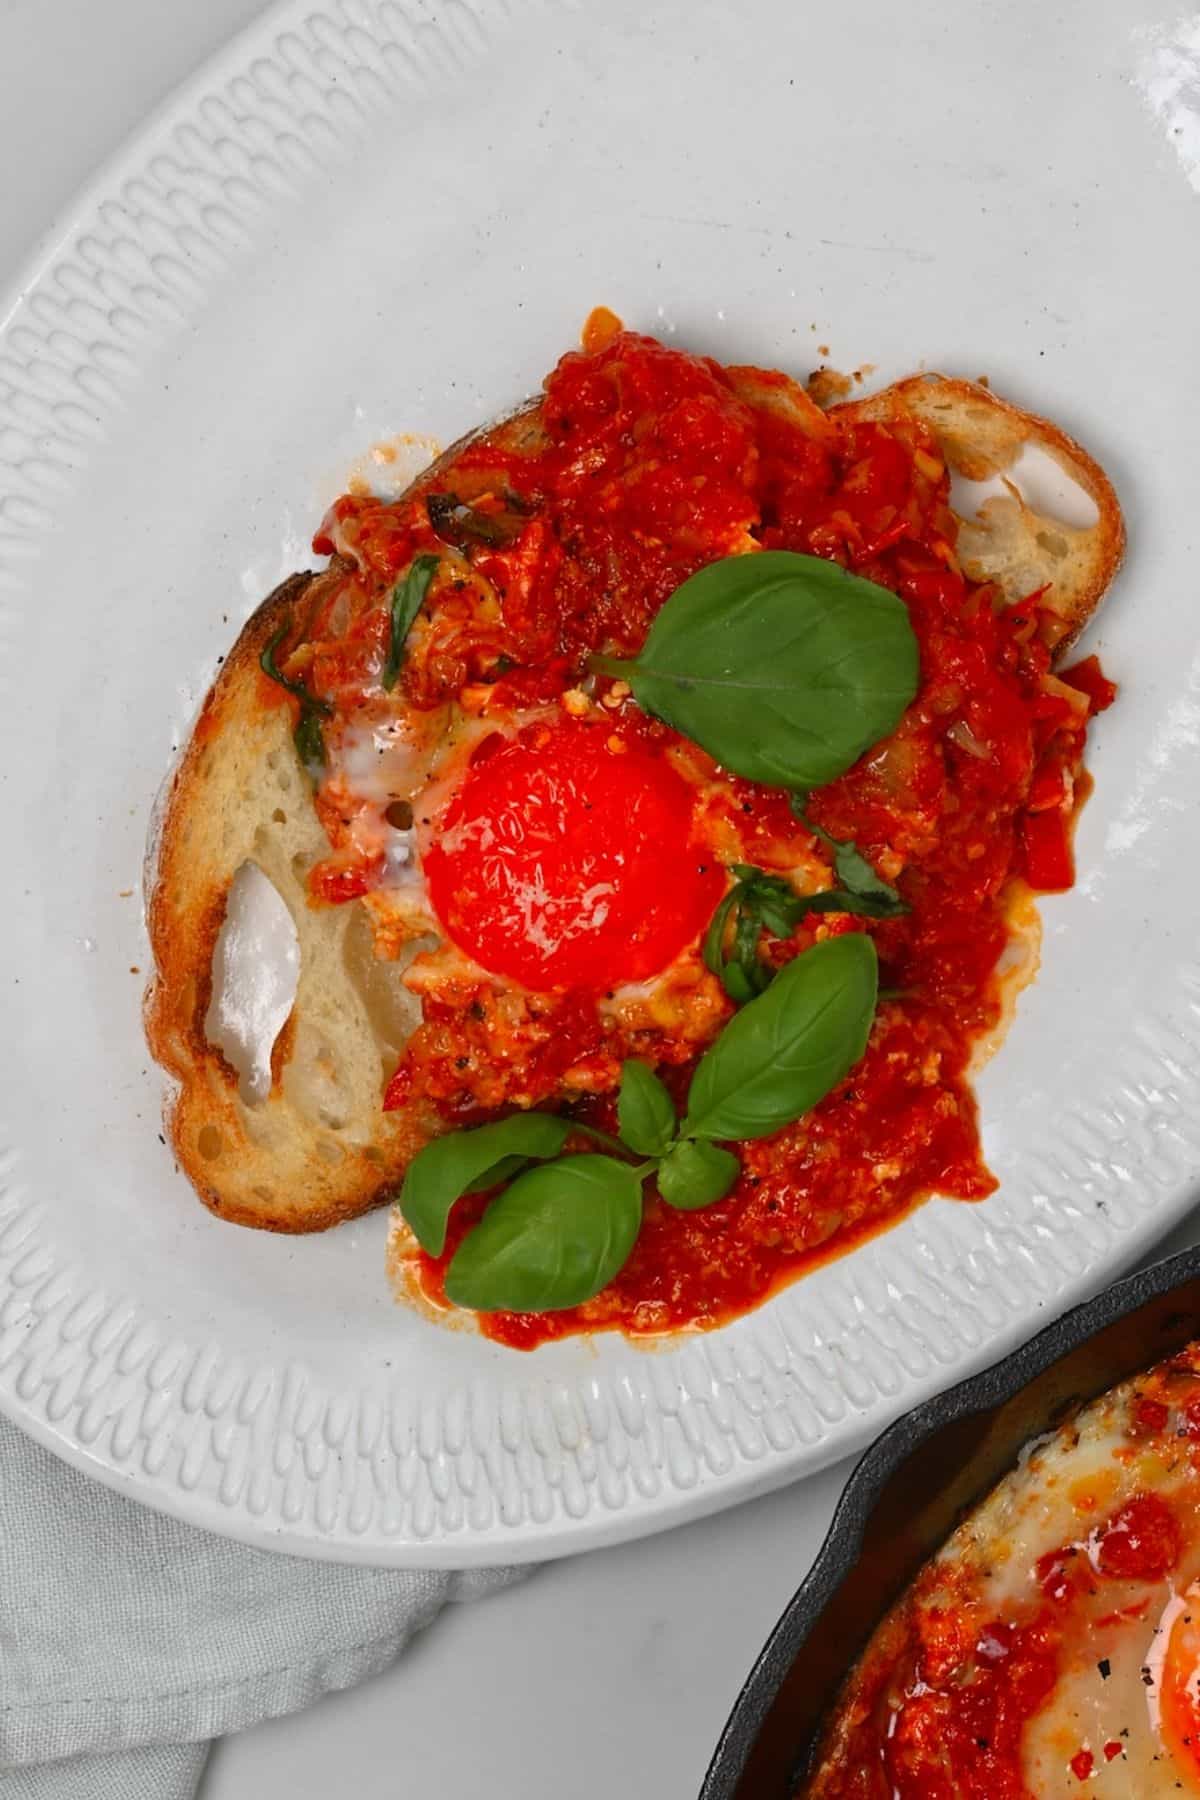 A serving of eggs in purgatory over toast